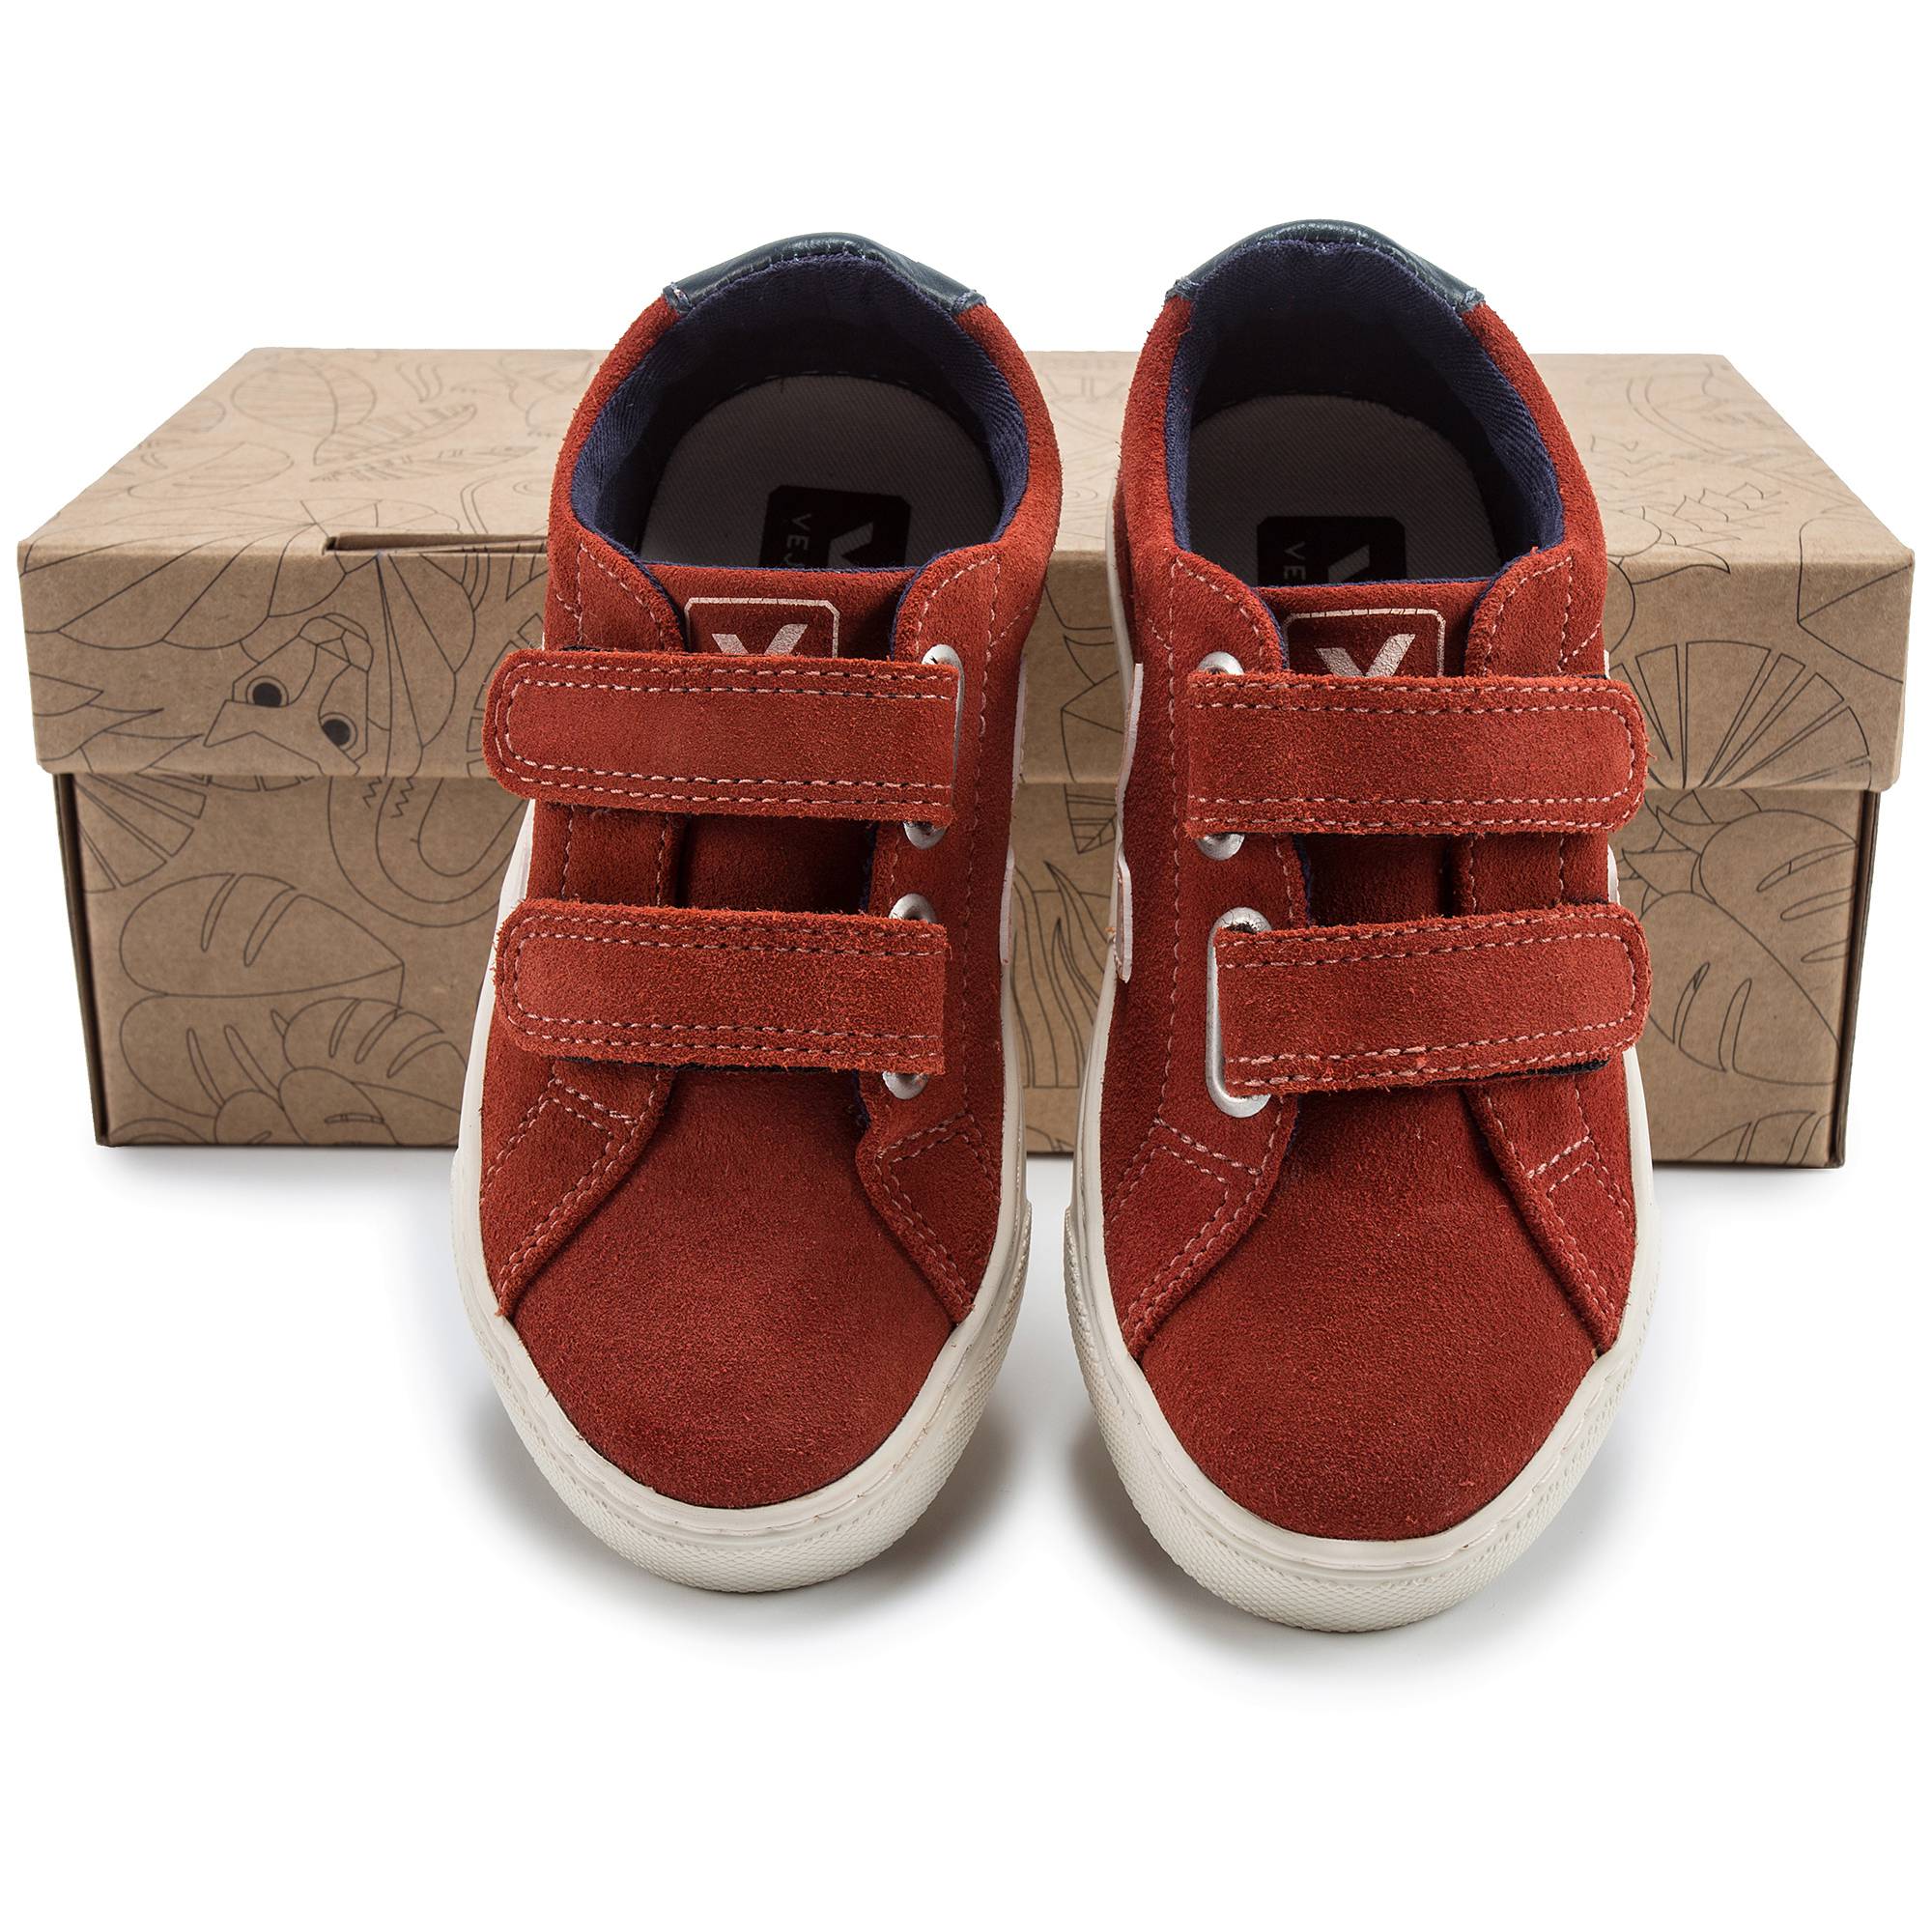 Girls & Boys Red Leather Velcro With White "V" Shoes